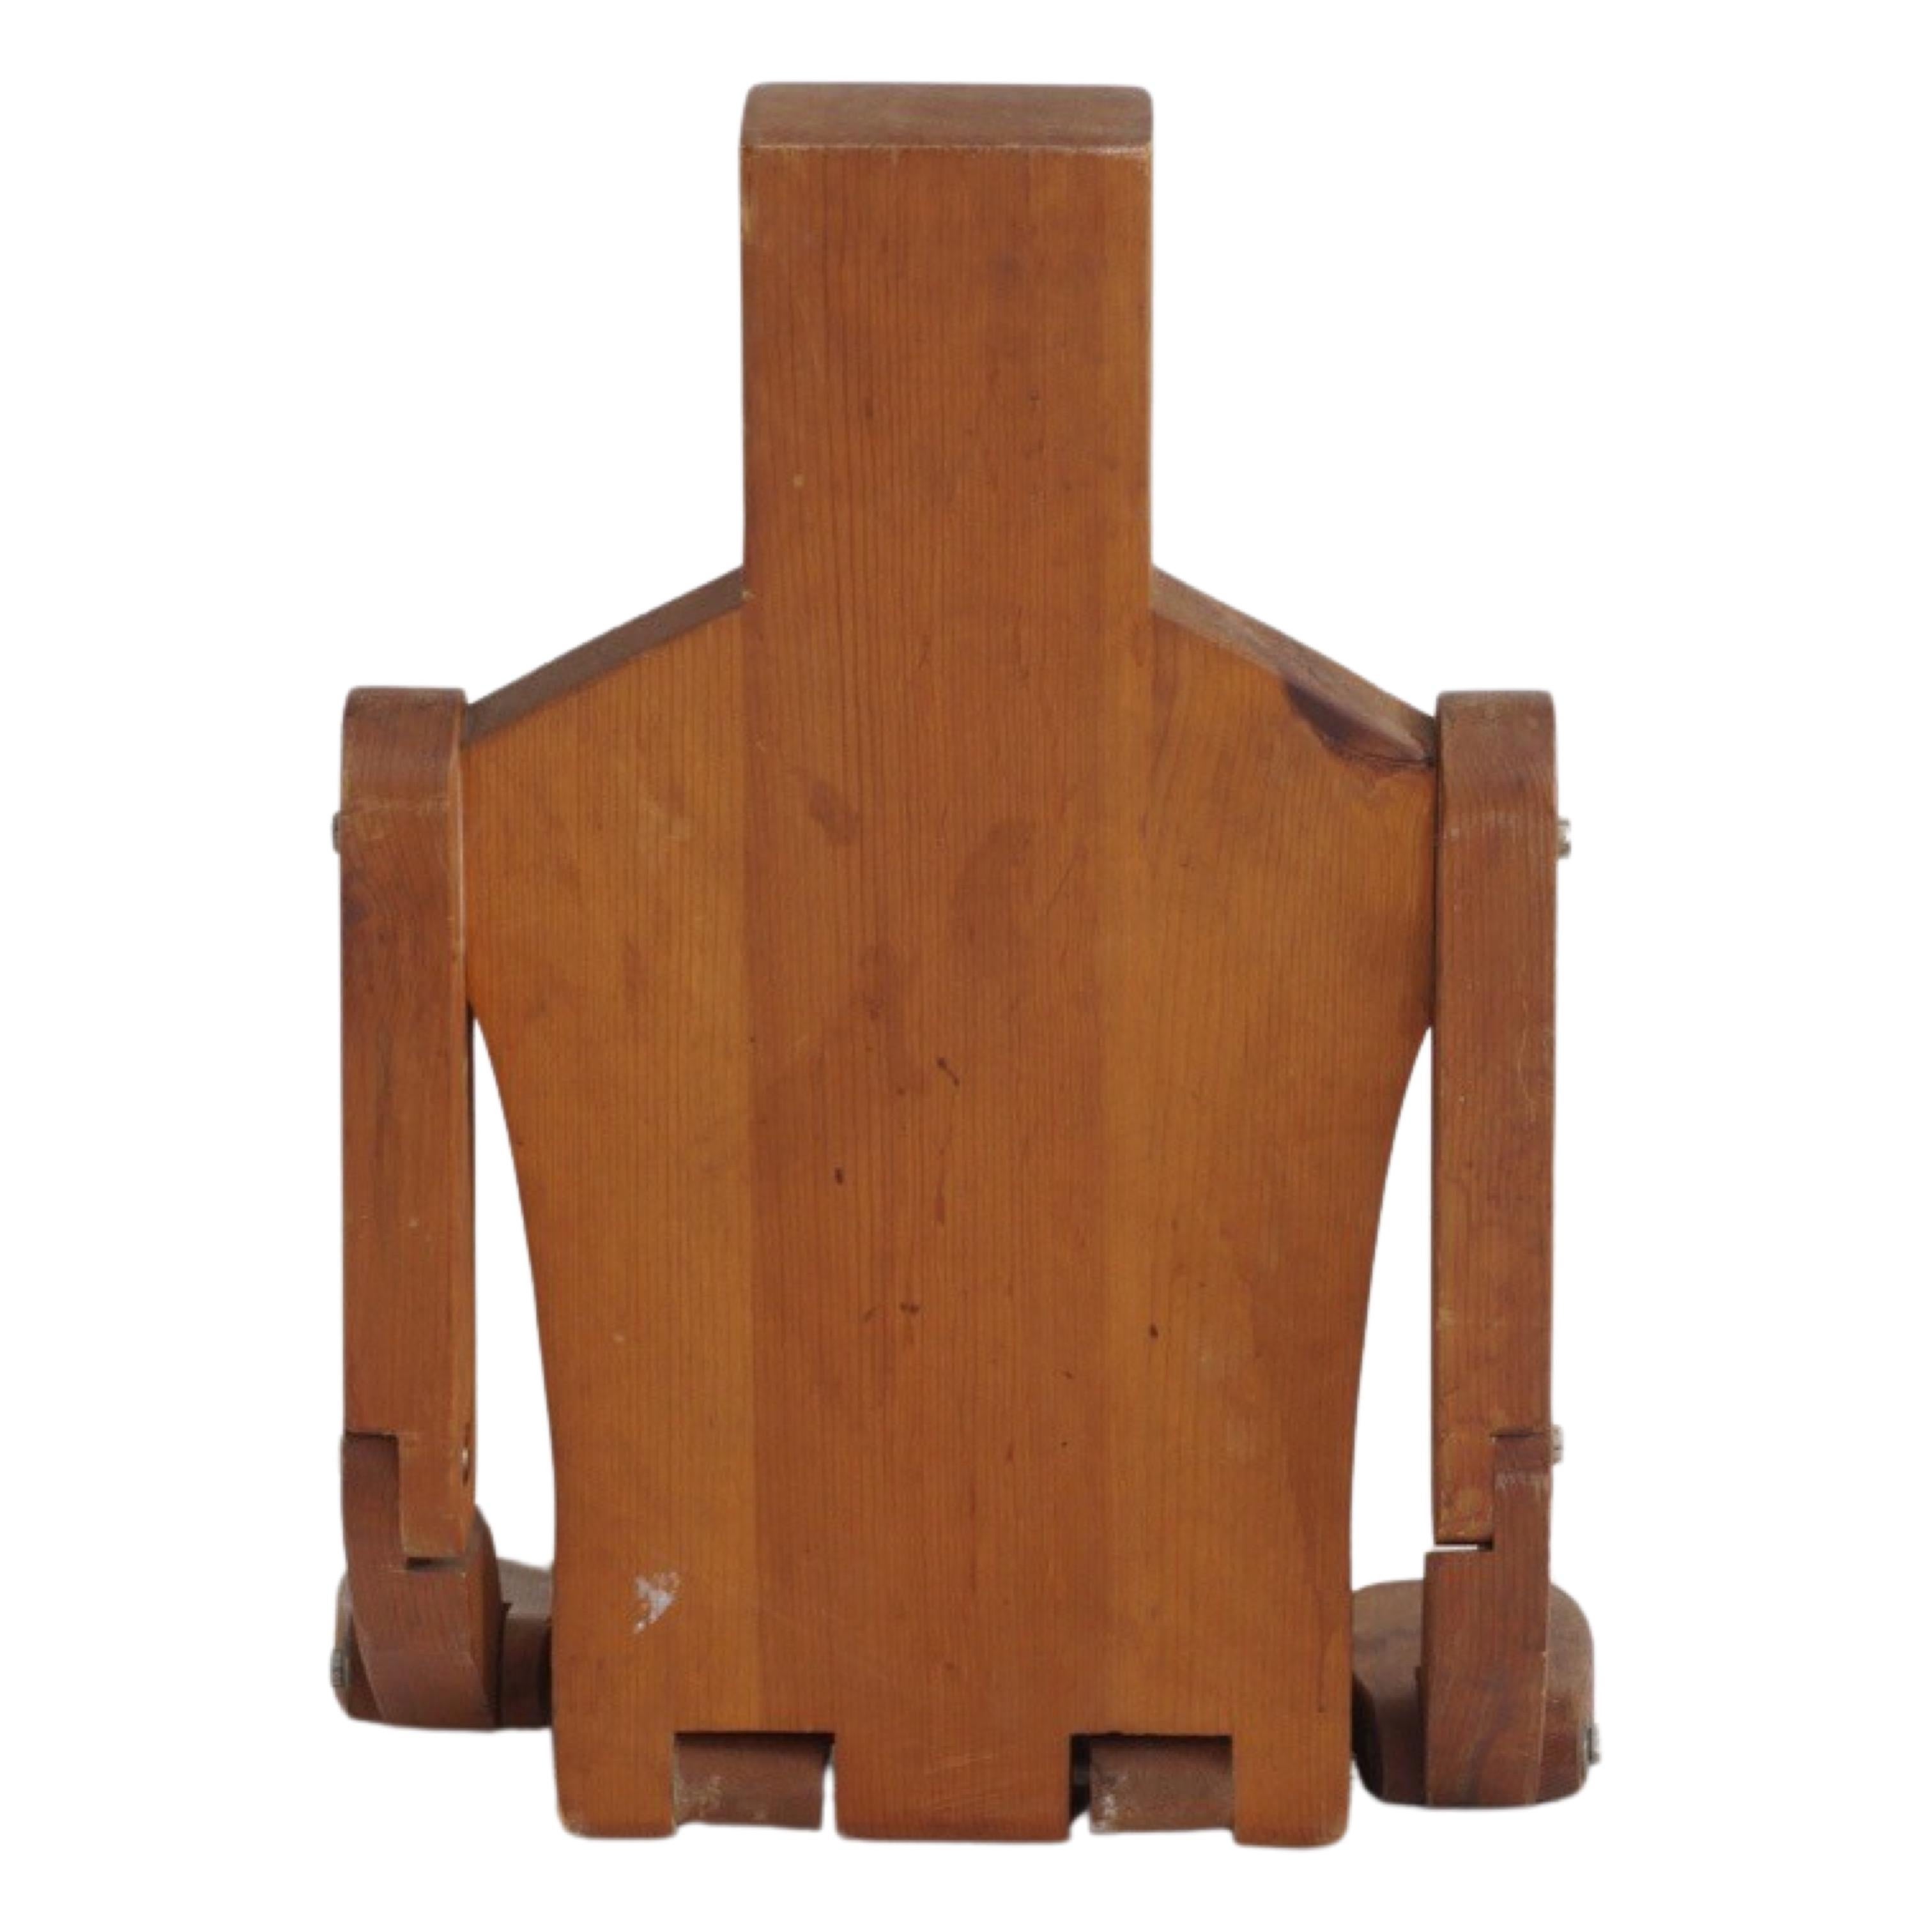 Articulated Wood Figure by Don Ellefson, 1980s For Sale 4